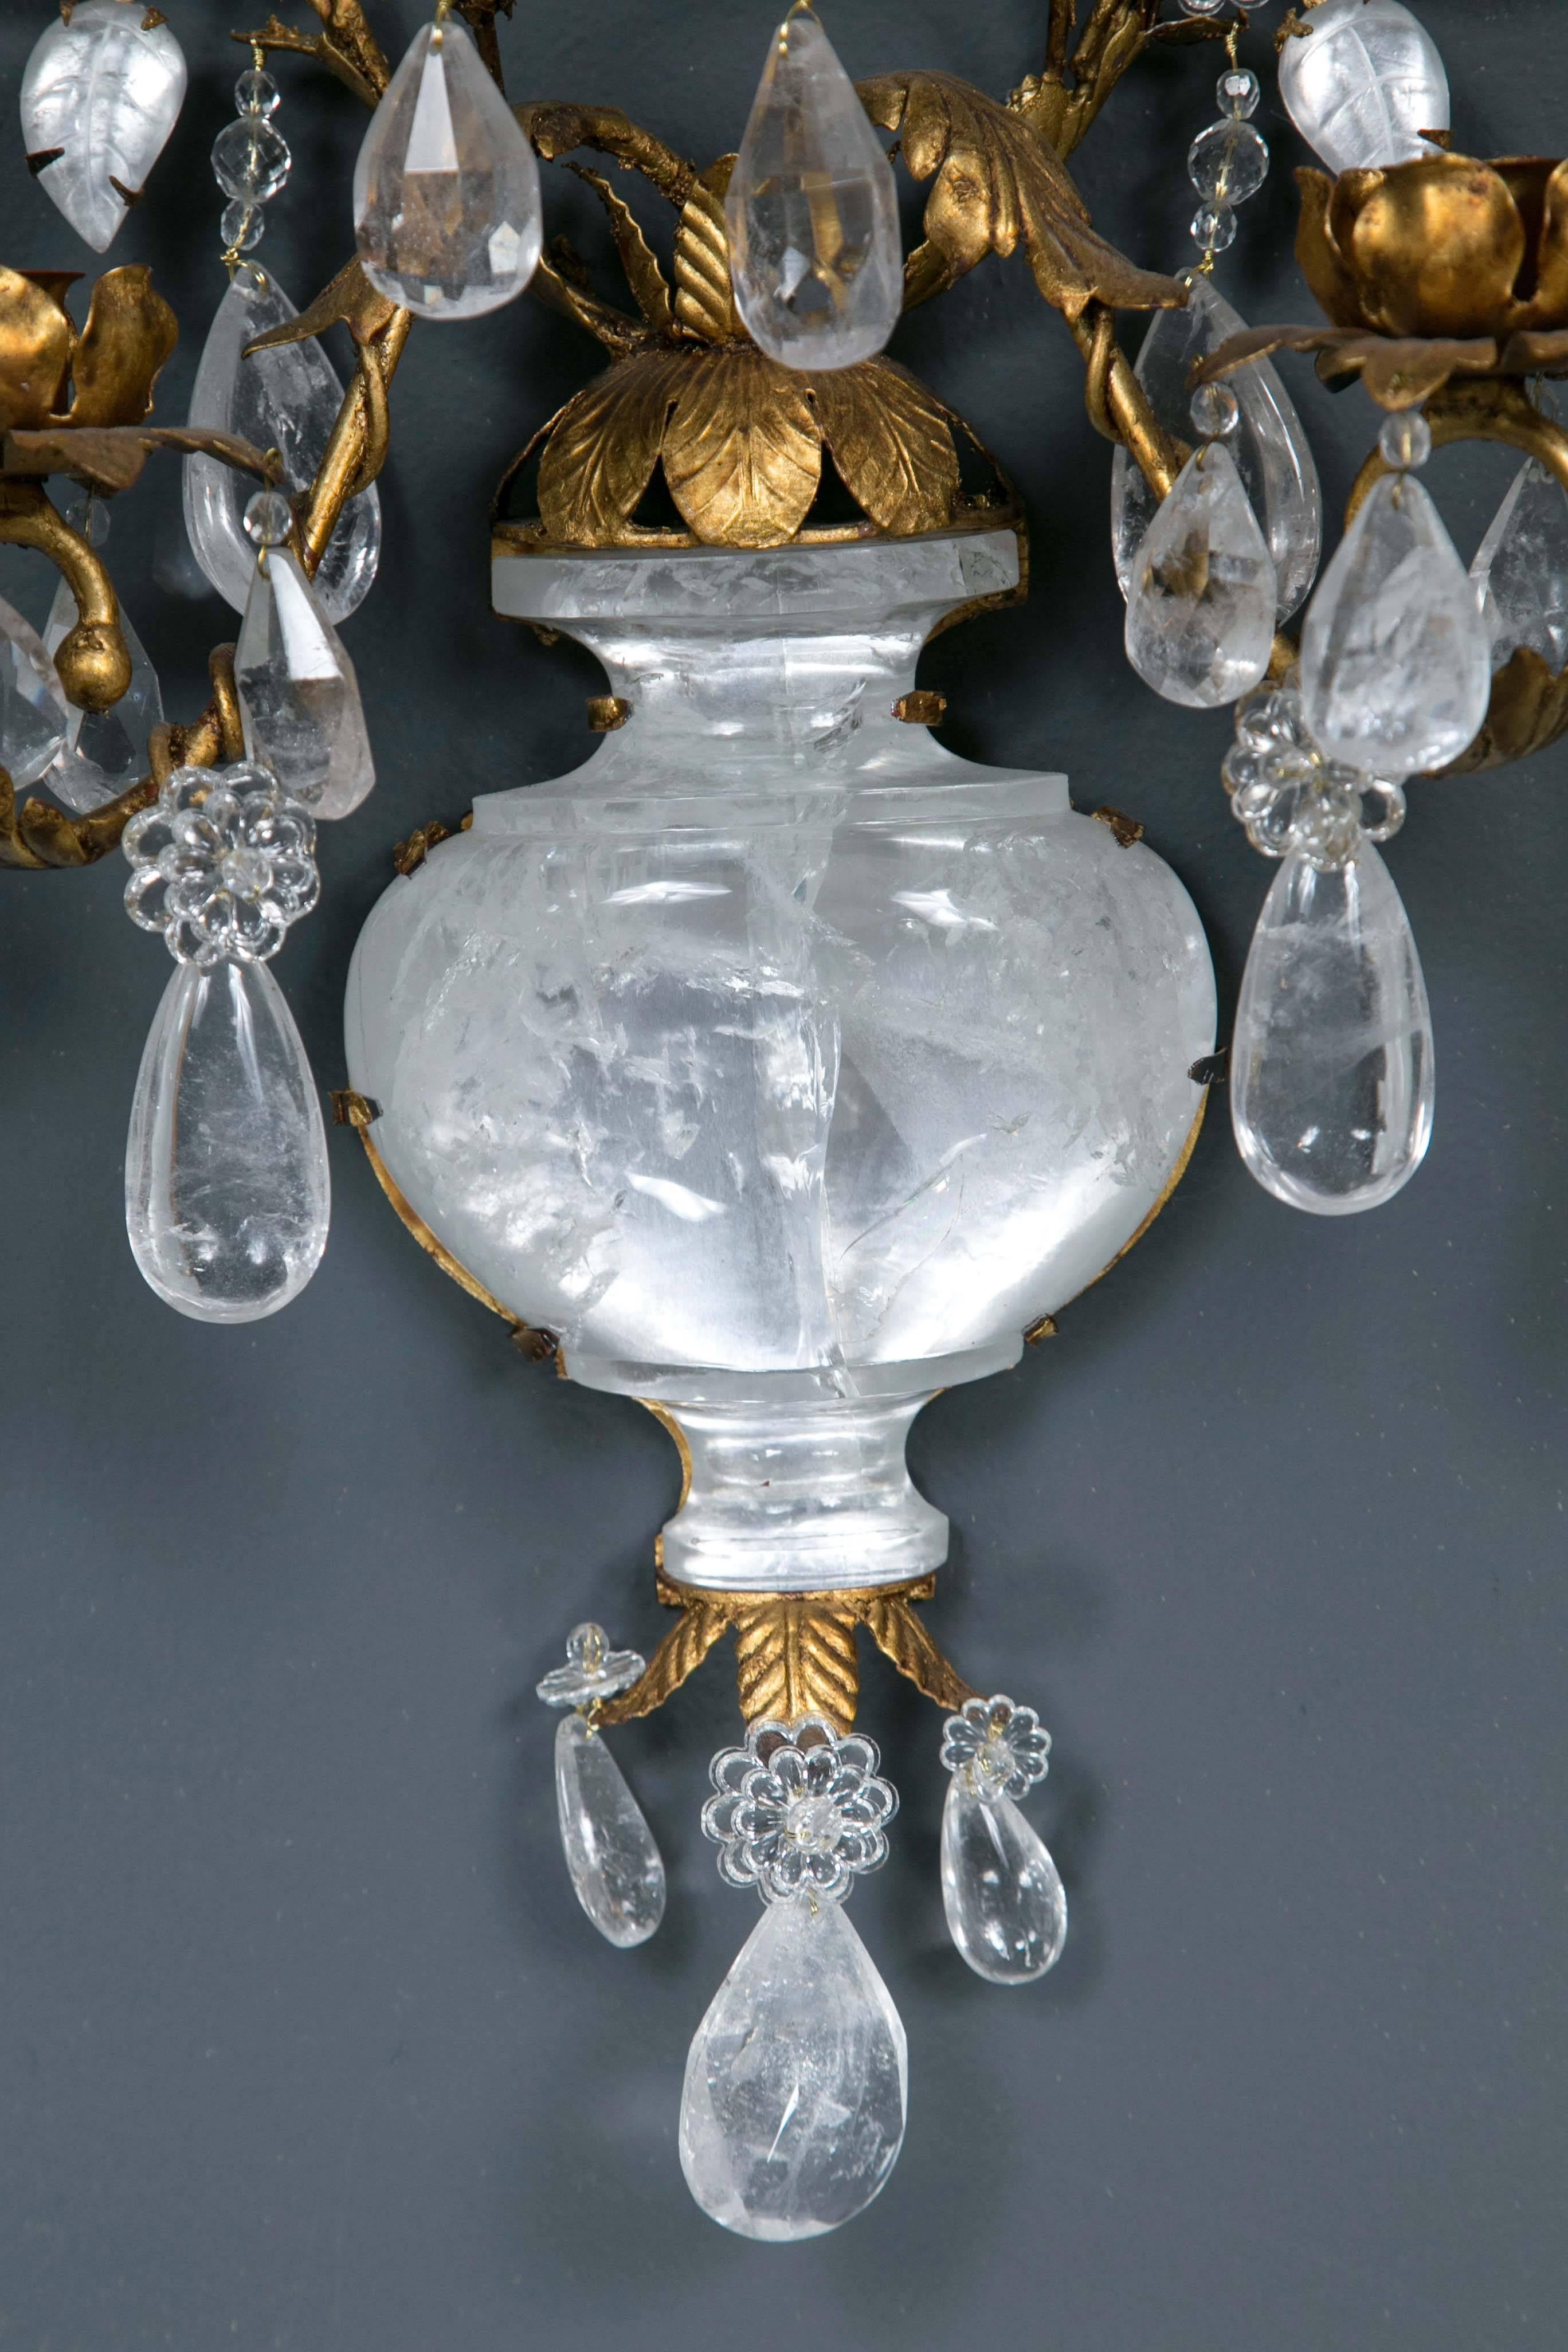 Monumental French gilt crystal and rock crystal sconces (must be wired).